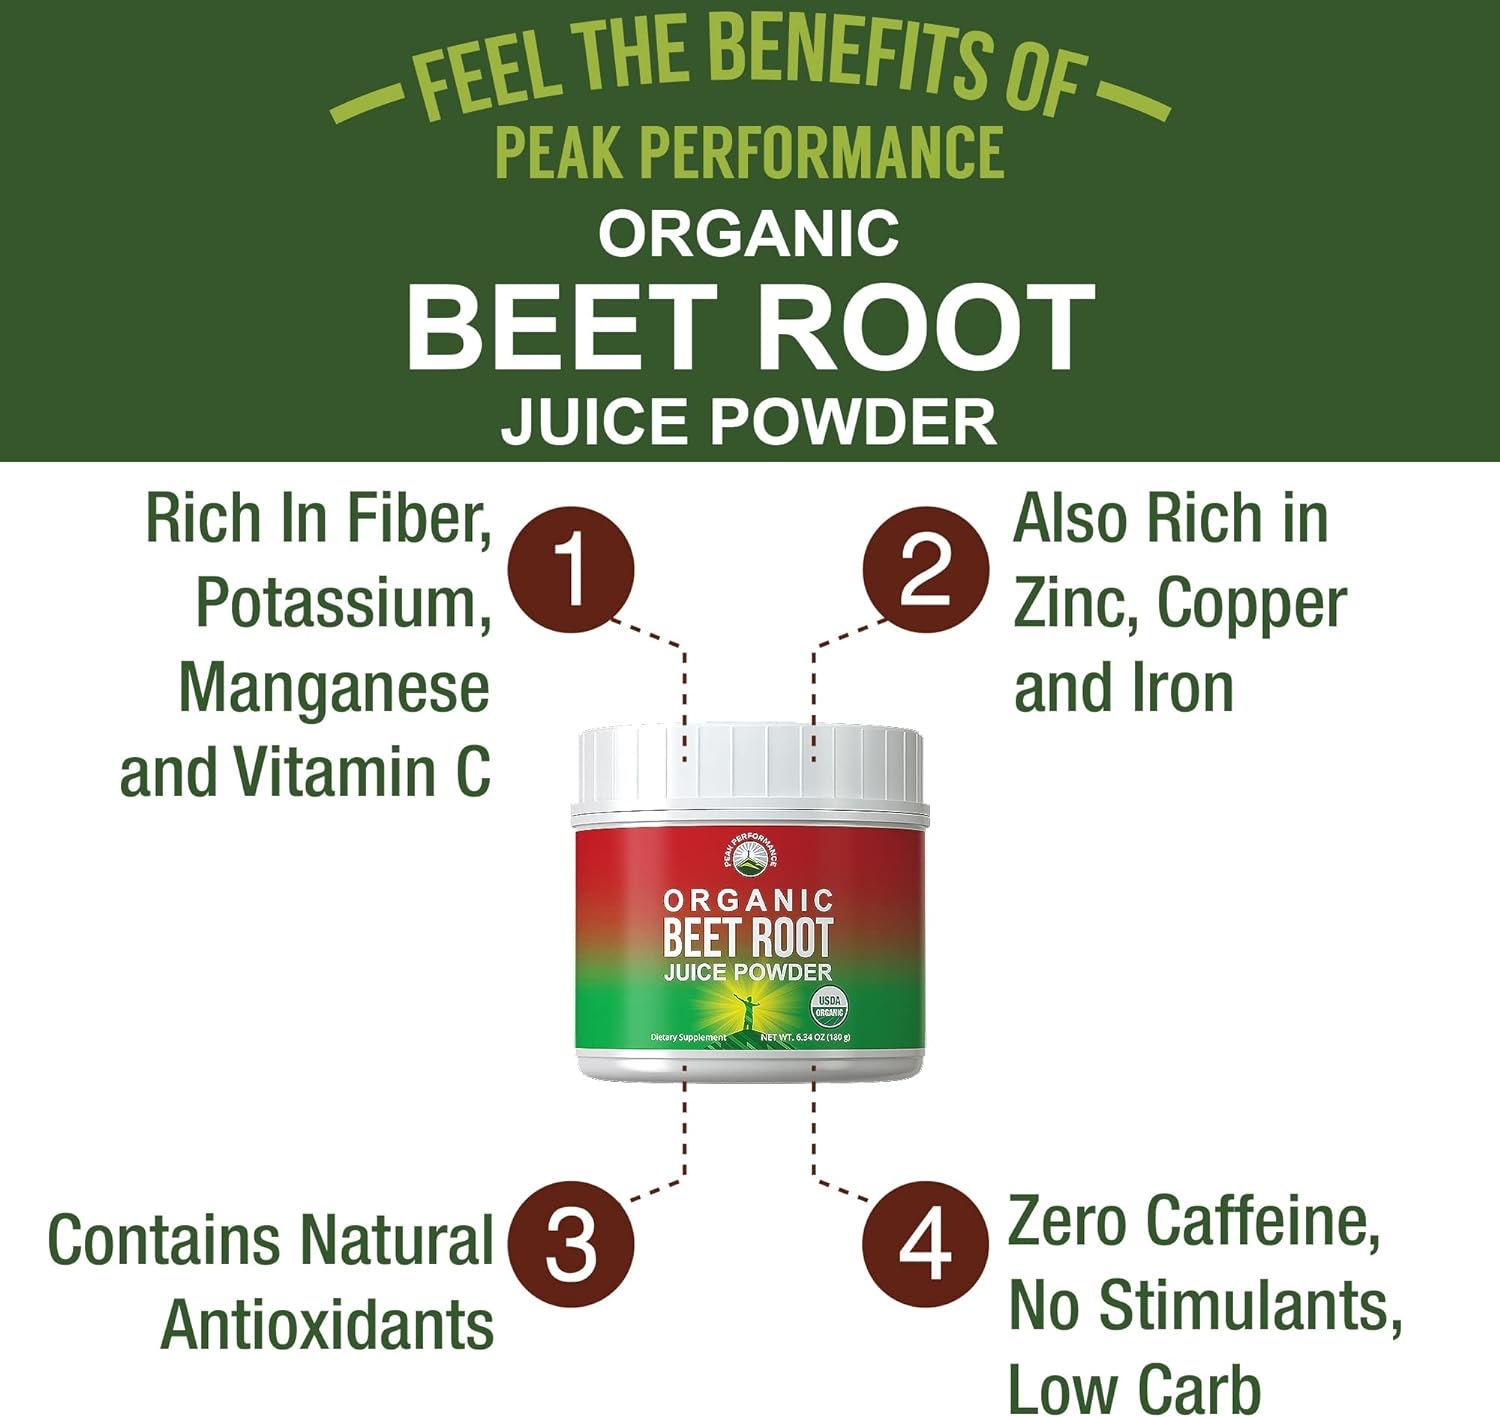 Organic Beet Root Powder - Ultra High Purity Super Food Beets Juice Powder. 100% Pure Organic Nitric Oxide Boosting Beetroot Supplement. Keto, Paleo, Vegan Organic Reds Superfood Rich in Polyphenols